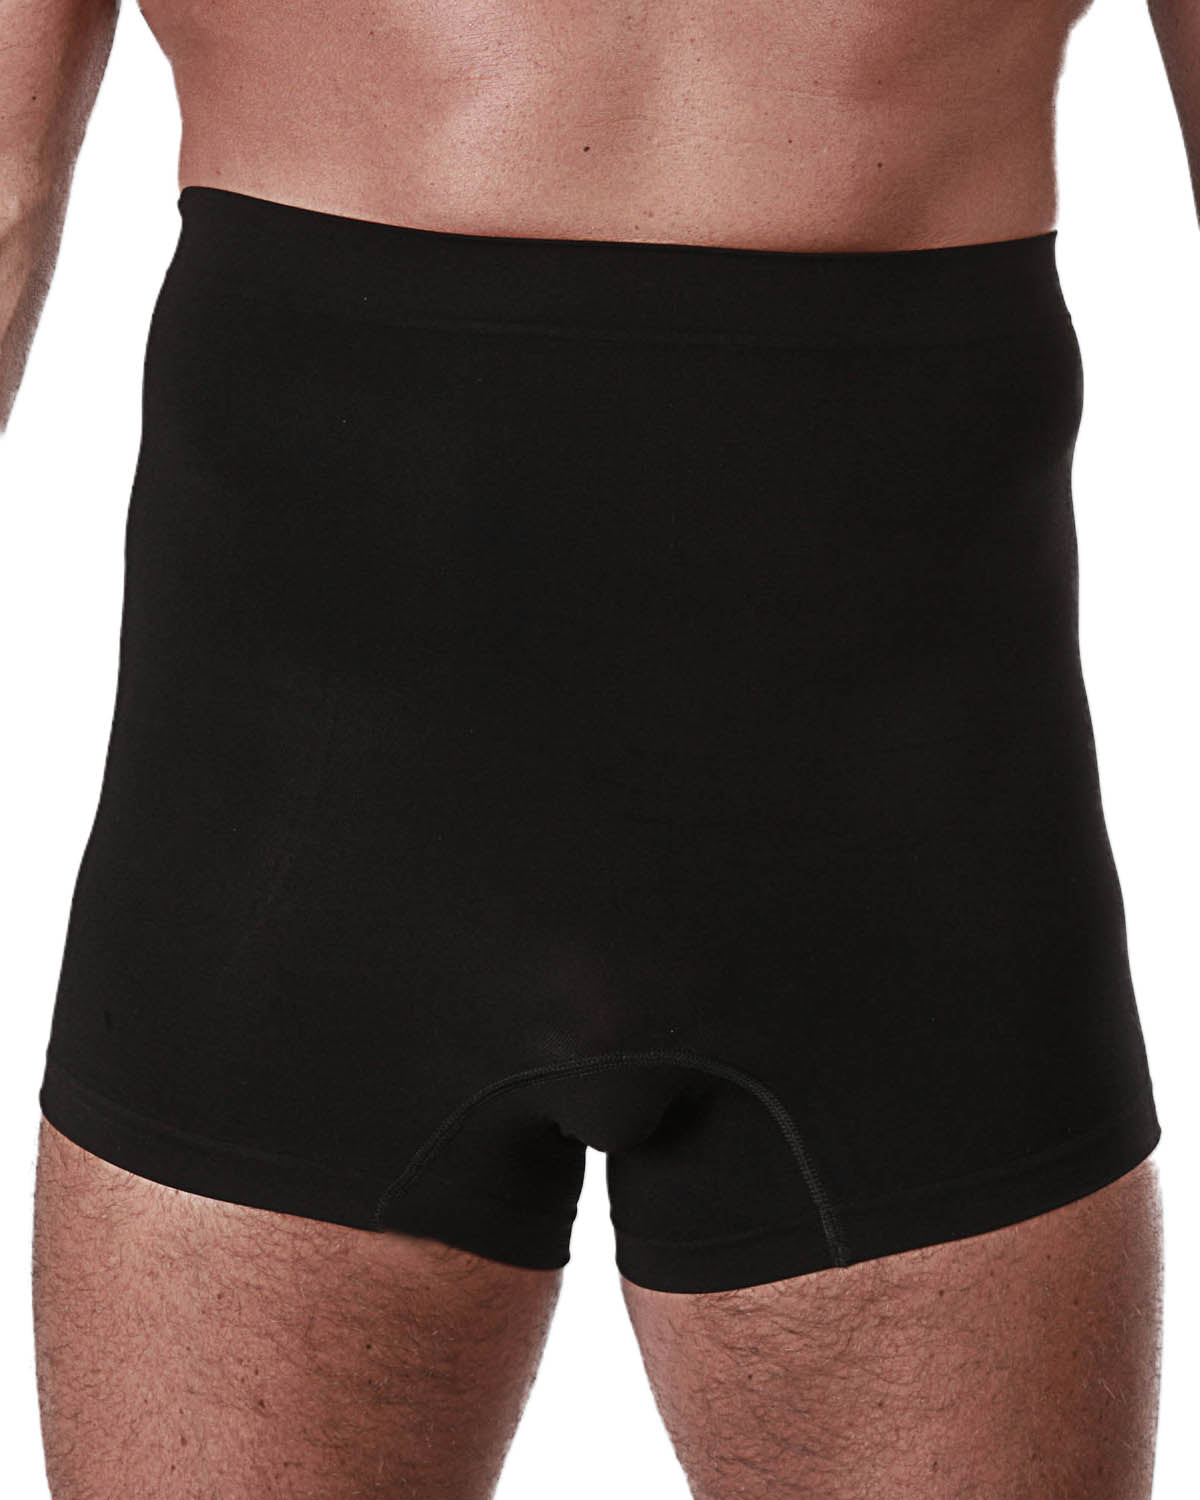 CUI Mens Hernia Low Waist Support Girdle With Legs - 1 each